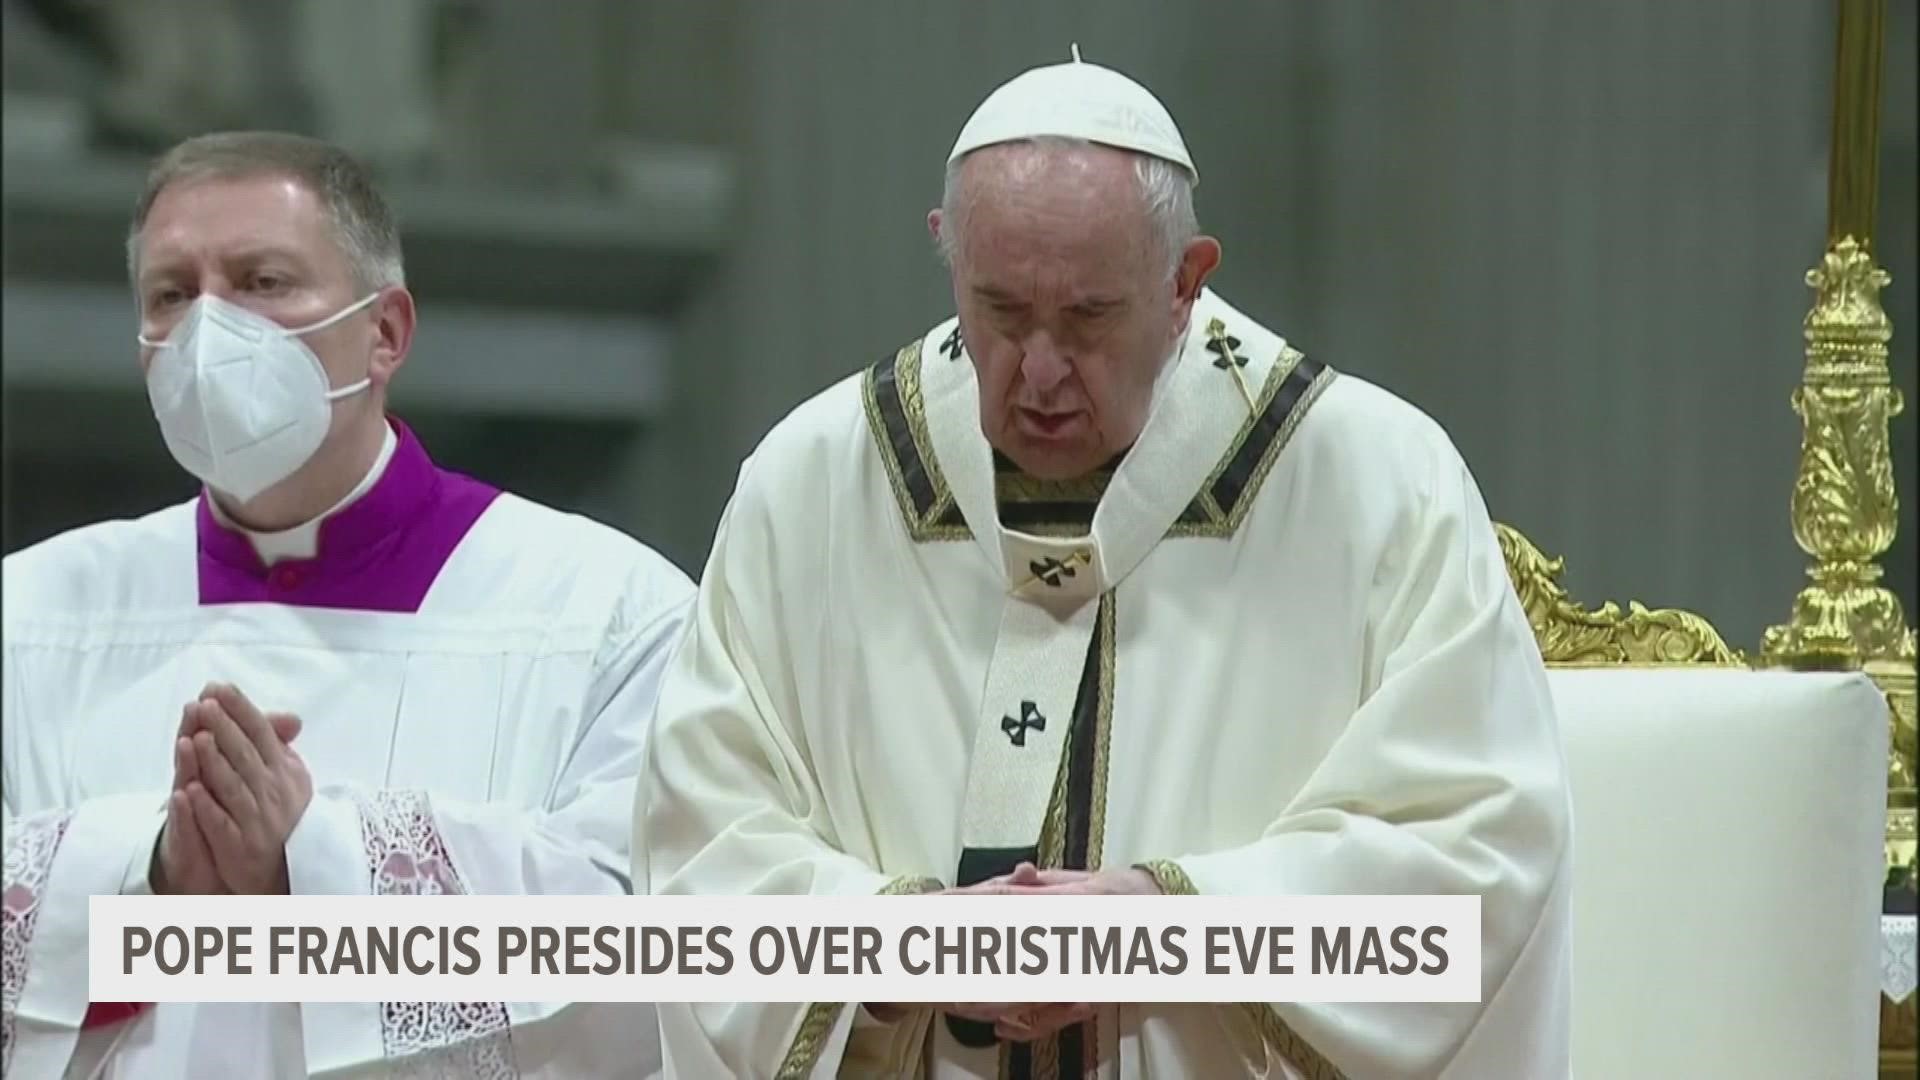 During the service, the pope reminded his congregation that Jesus came into the world poor, and urged compassion.